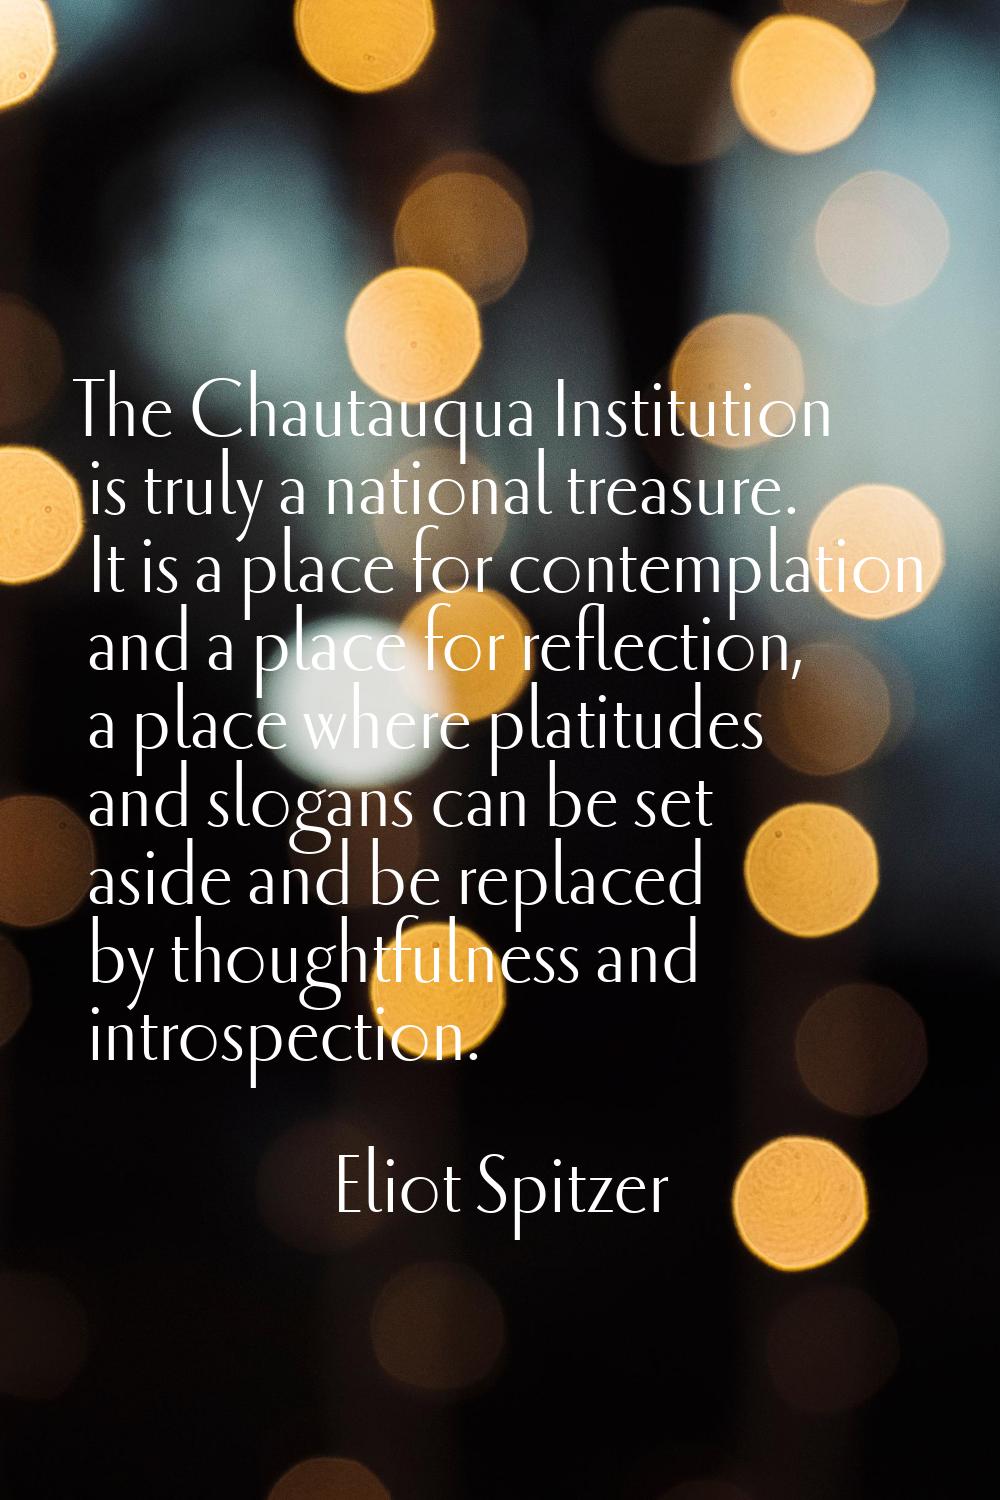 The Chautauqua Institution is truly a national treasure. It is a place for contemplation and a plac